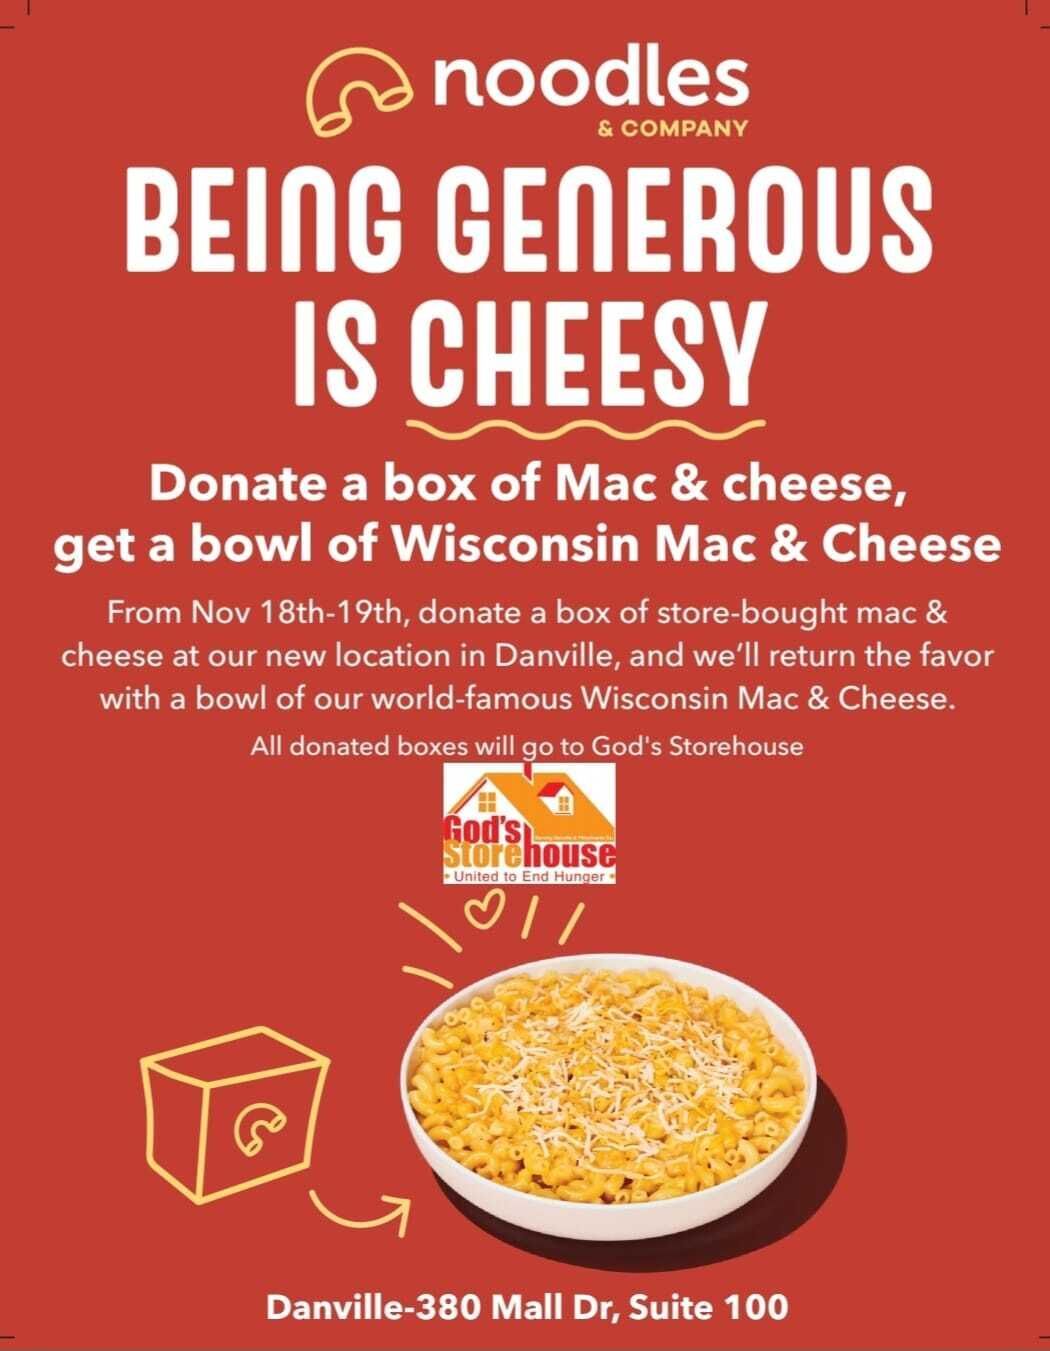 Being Generous is Cheesy